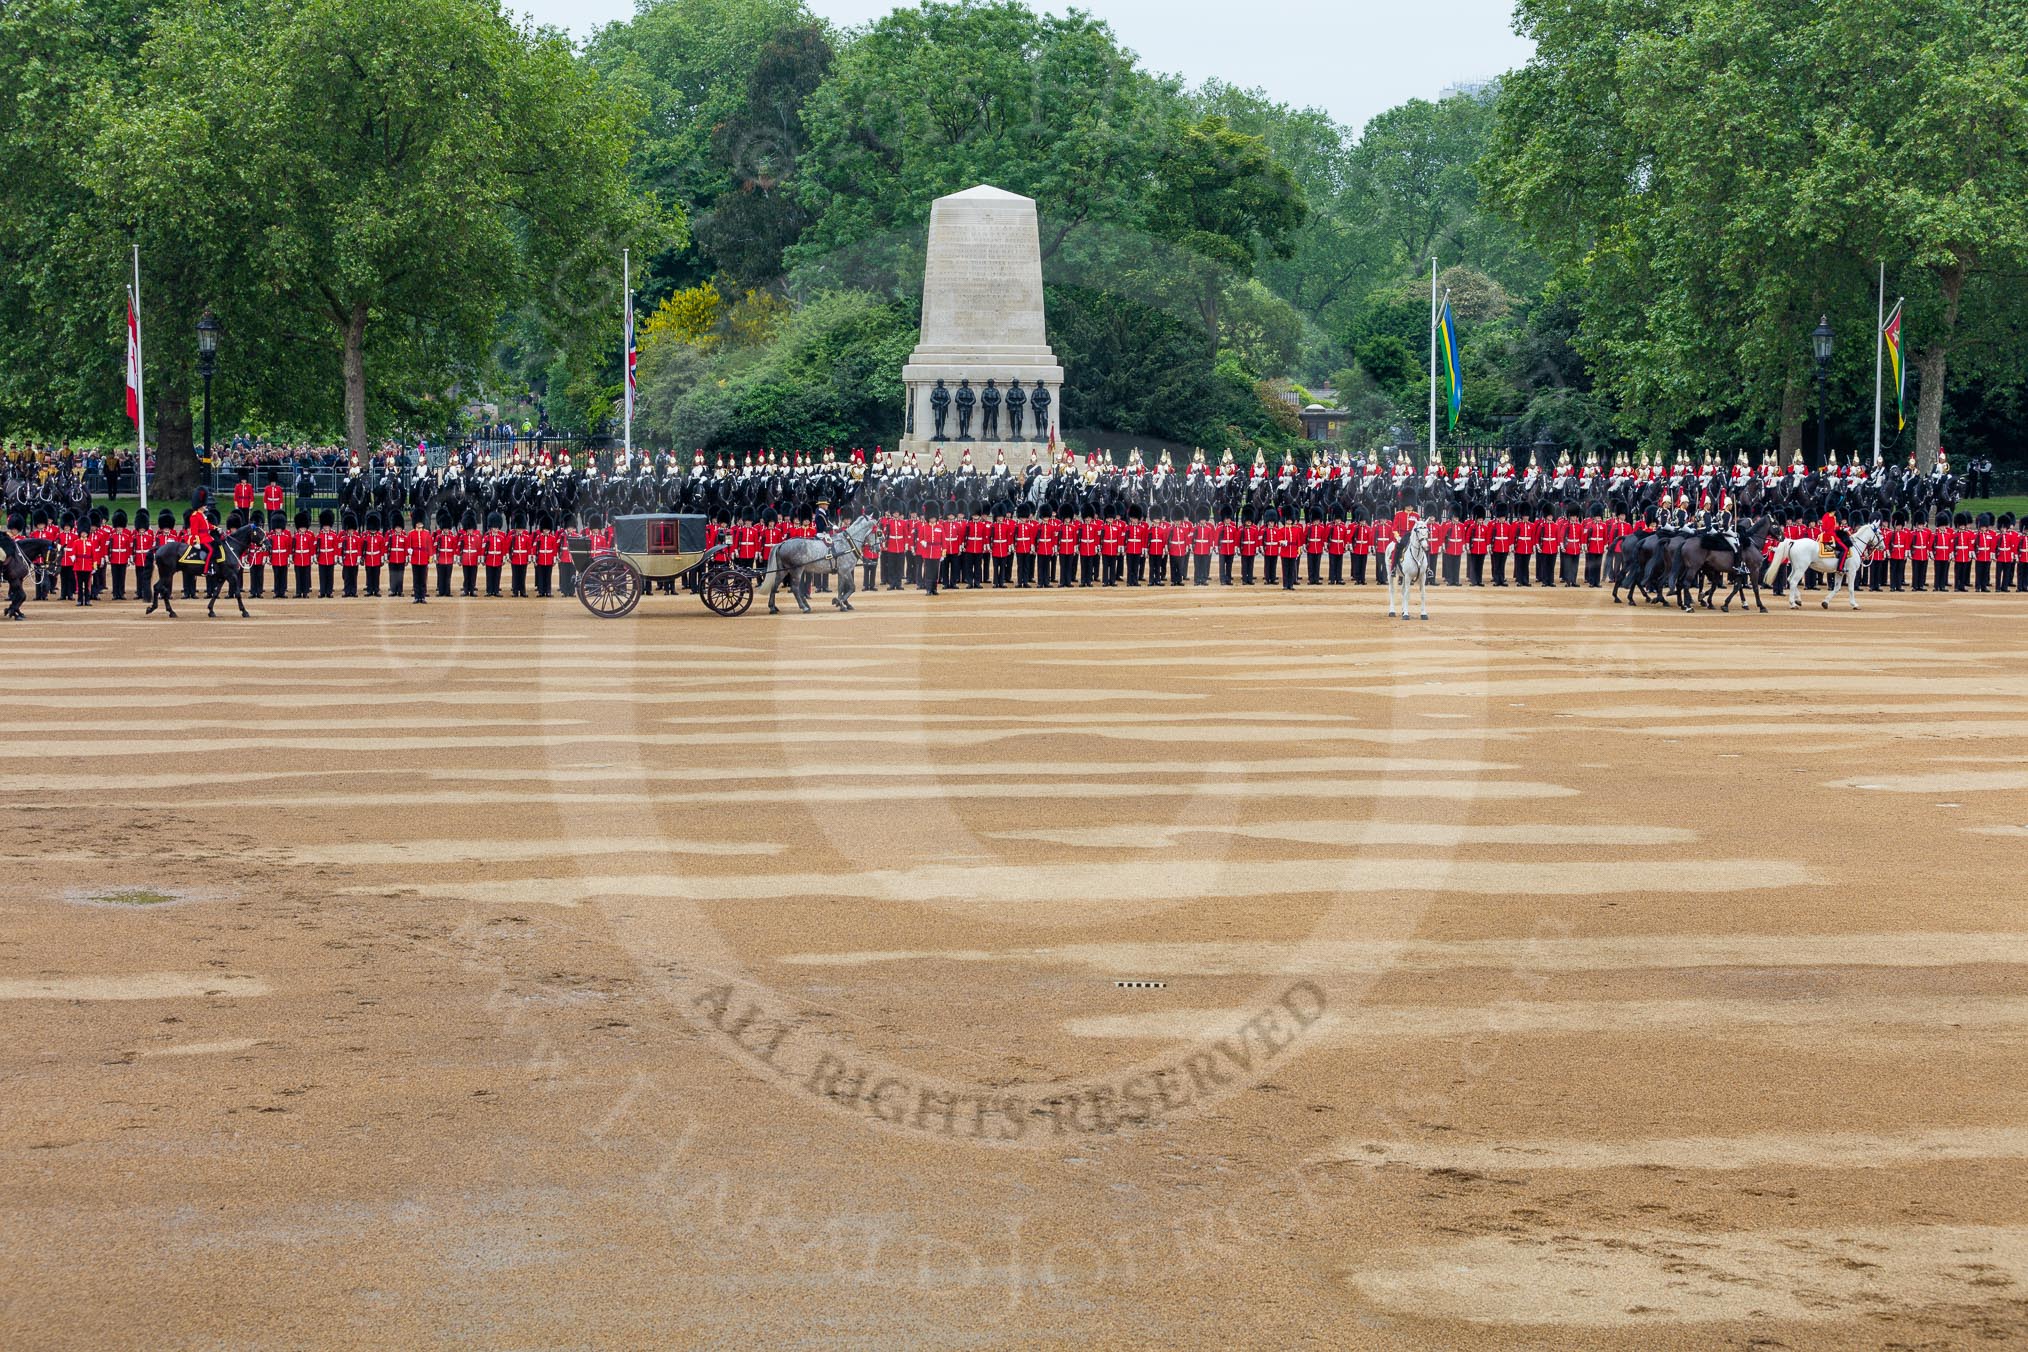 The Colonel's Review 2016.
Horse Guards Parade, Westminster,
London,

United Kingdom,
on 04 June 2016 at 11:02, image #196